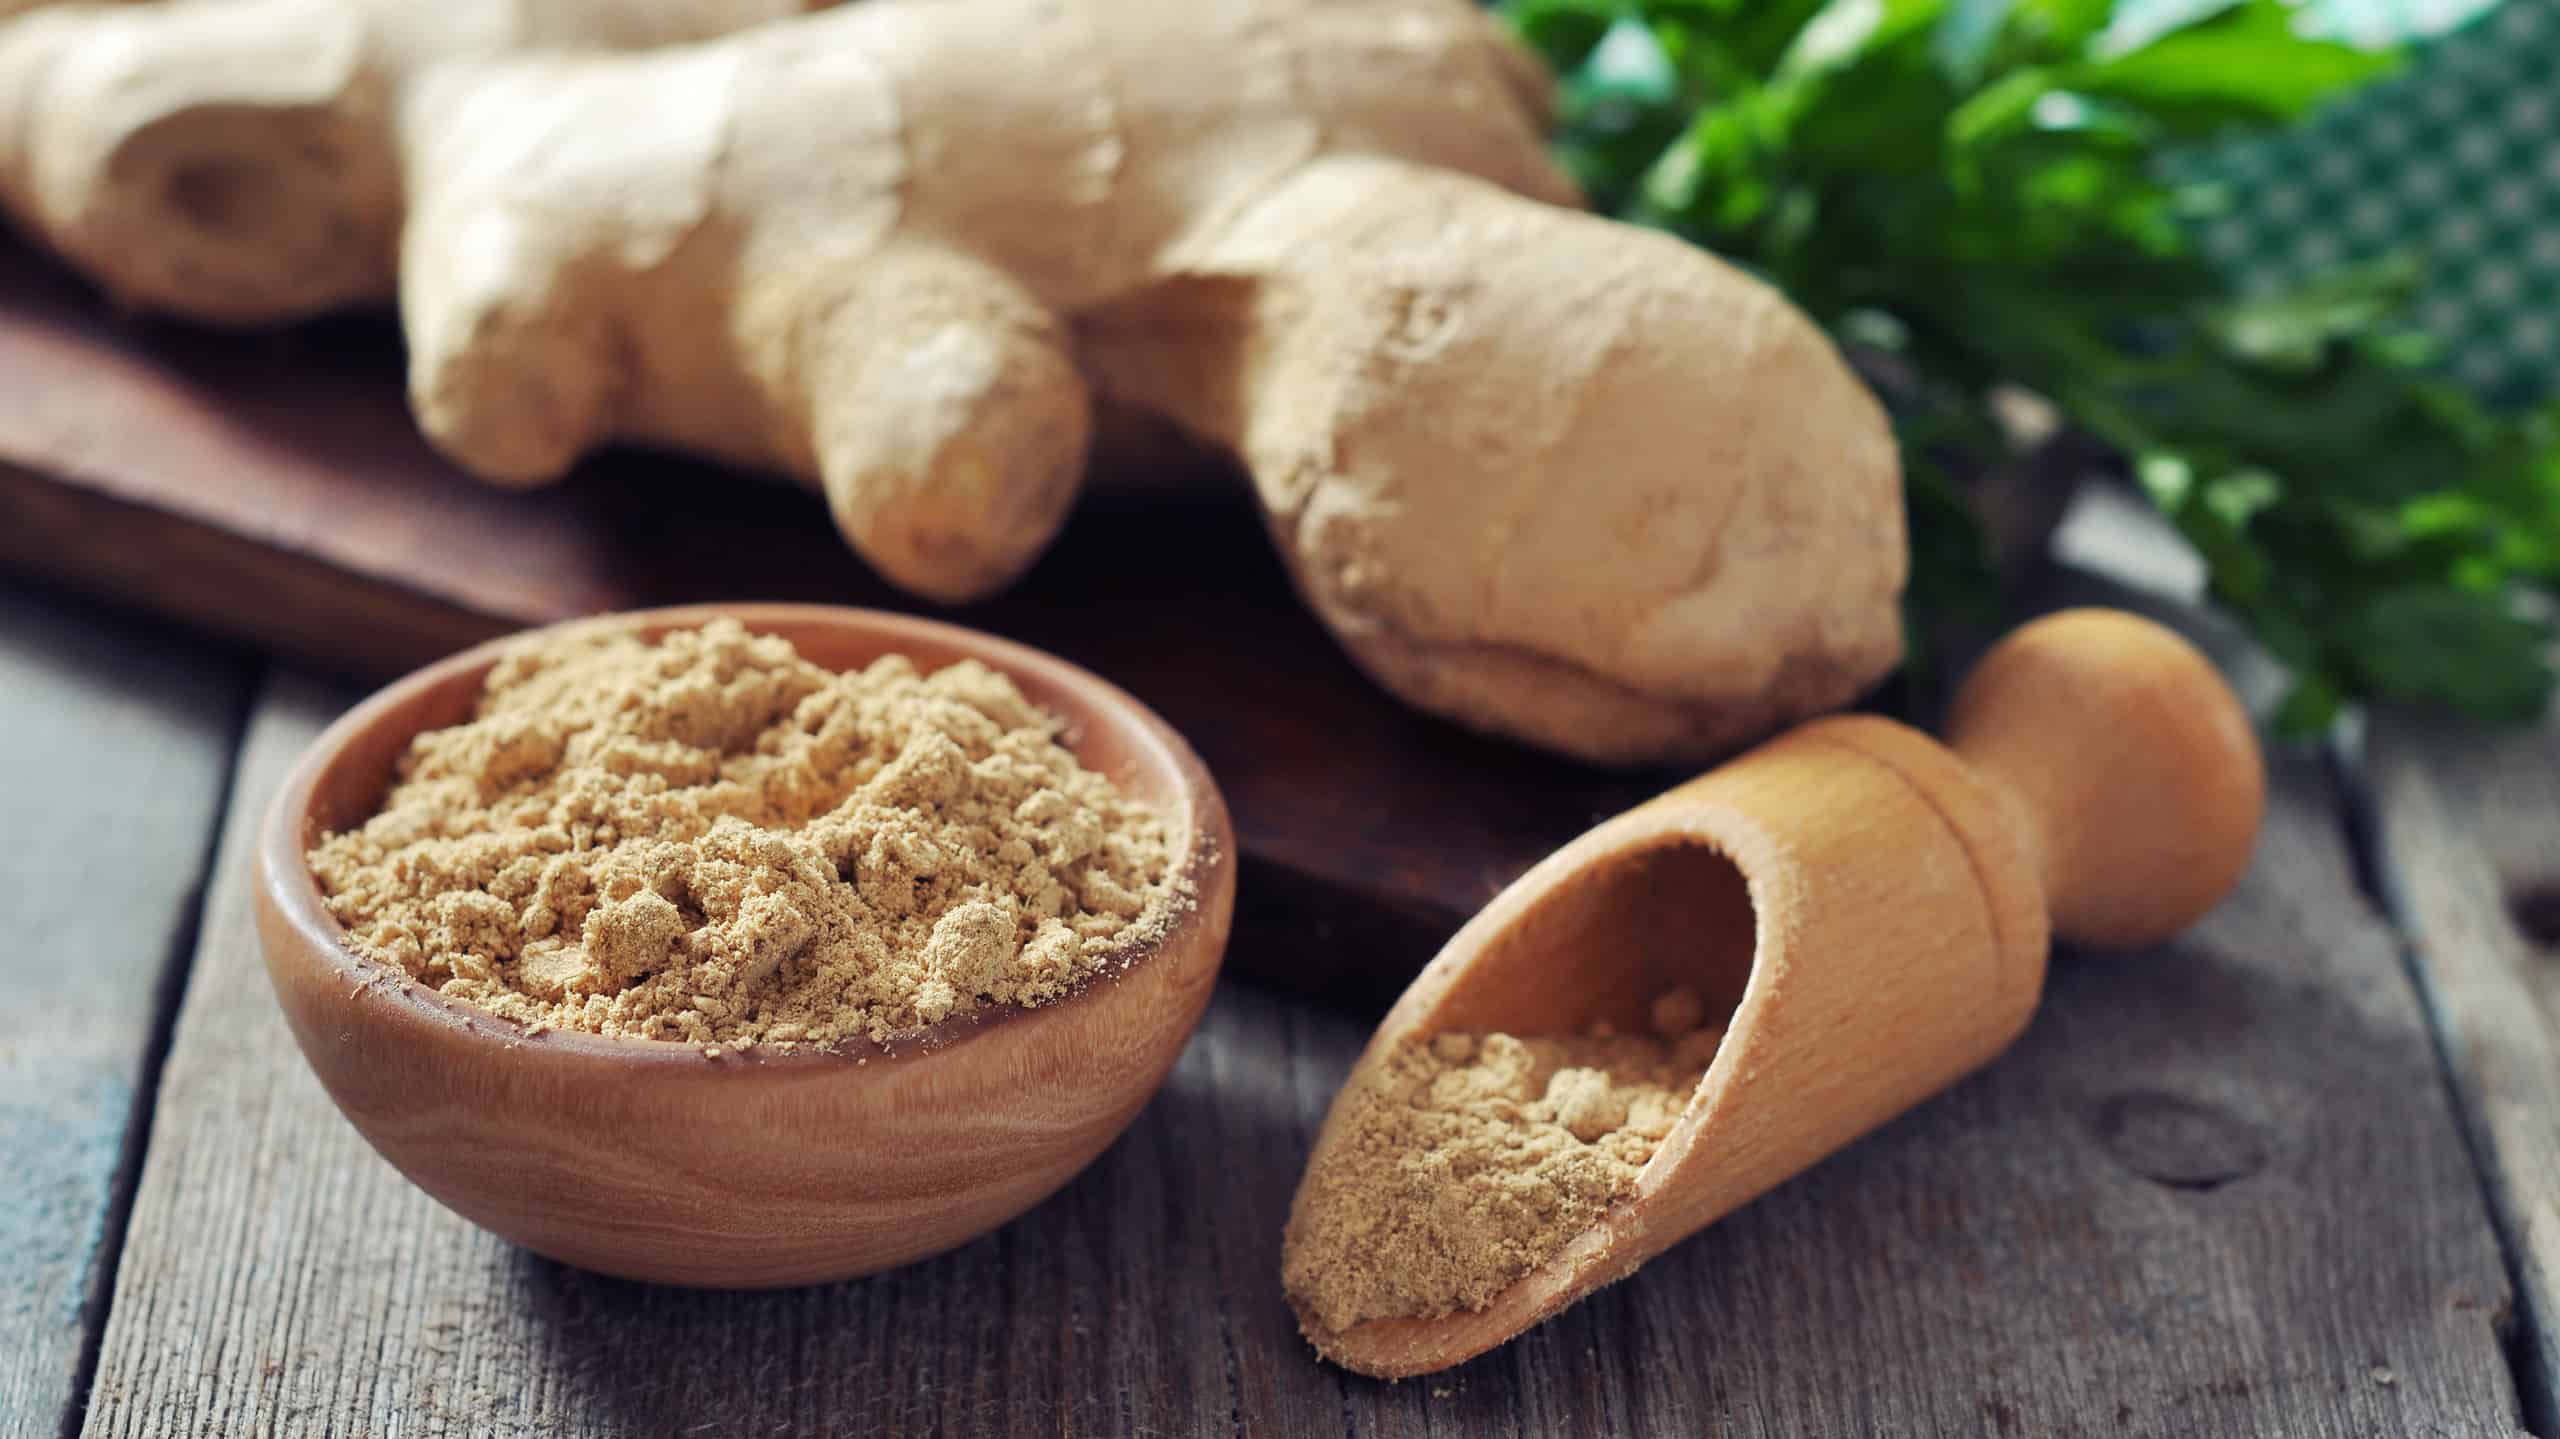 Fresh ginger root and ground ginger spice on wooden background